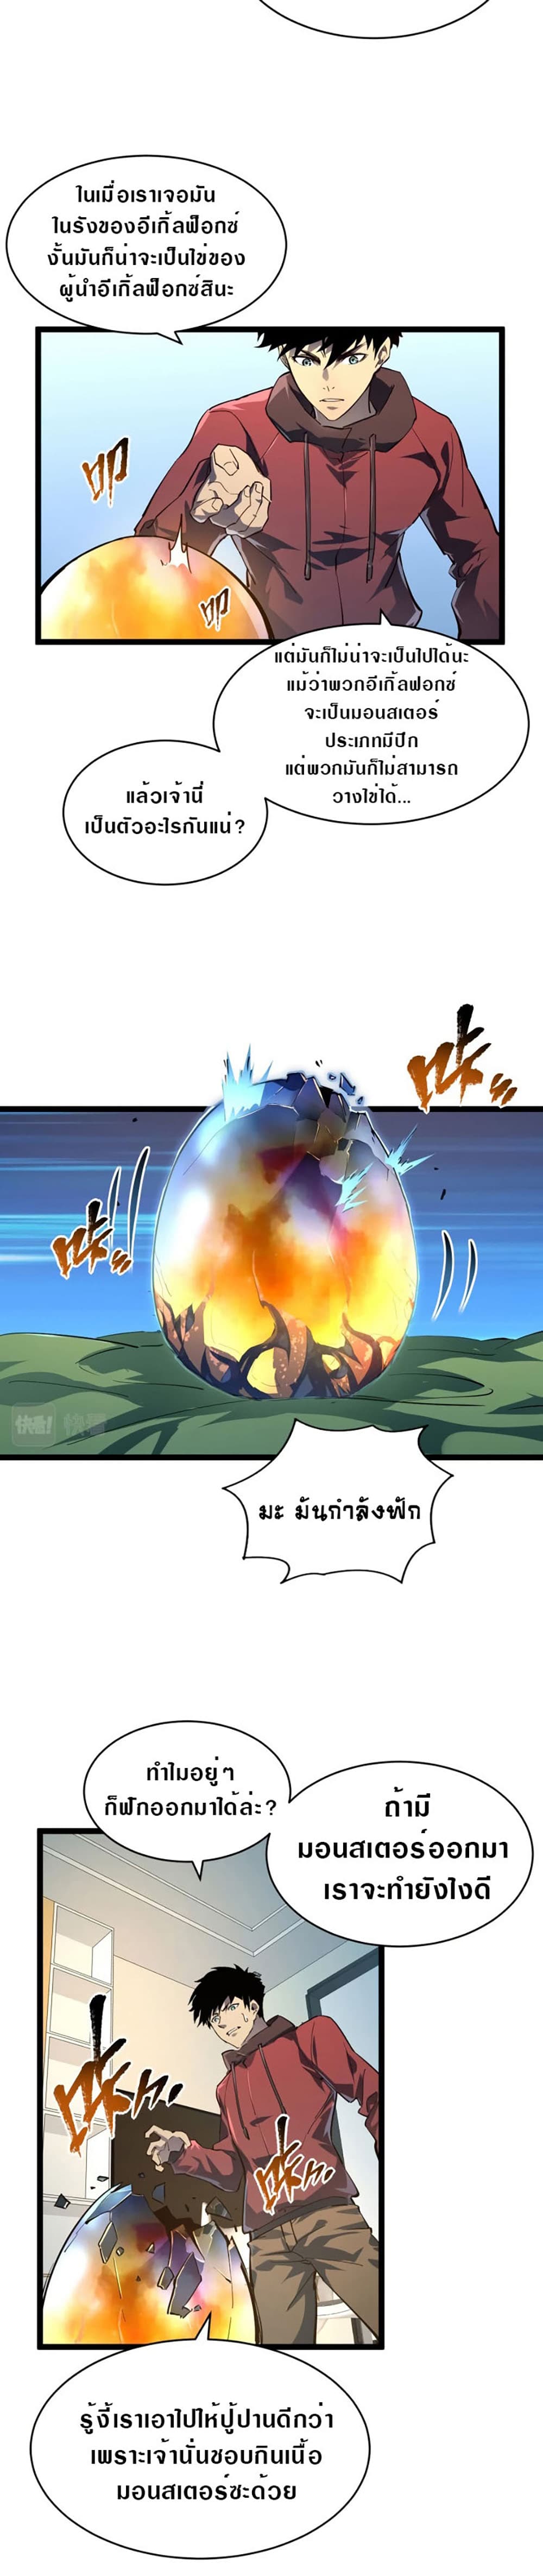 Rise From The Rubble เศษซากวันสิ้นโลก 82-82